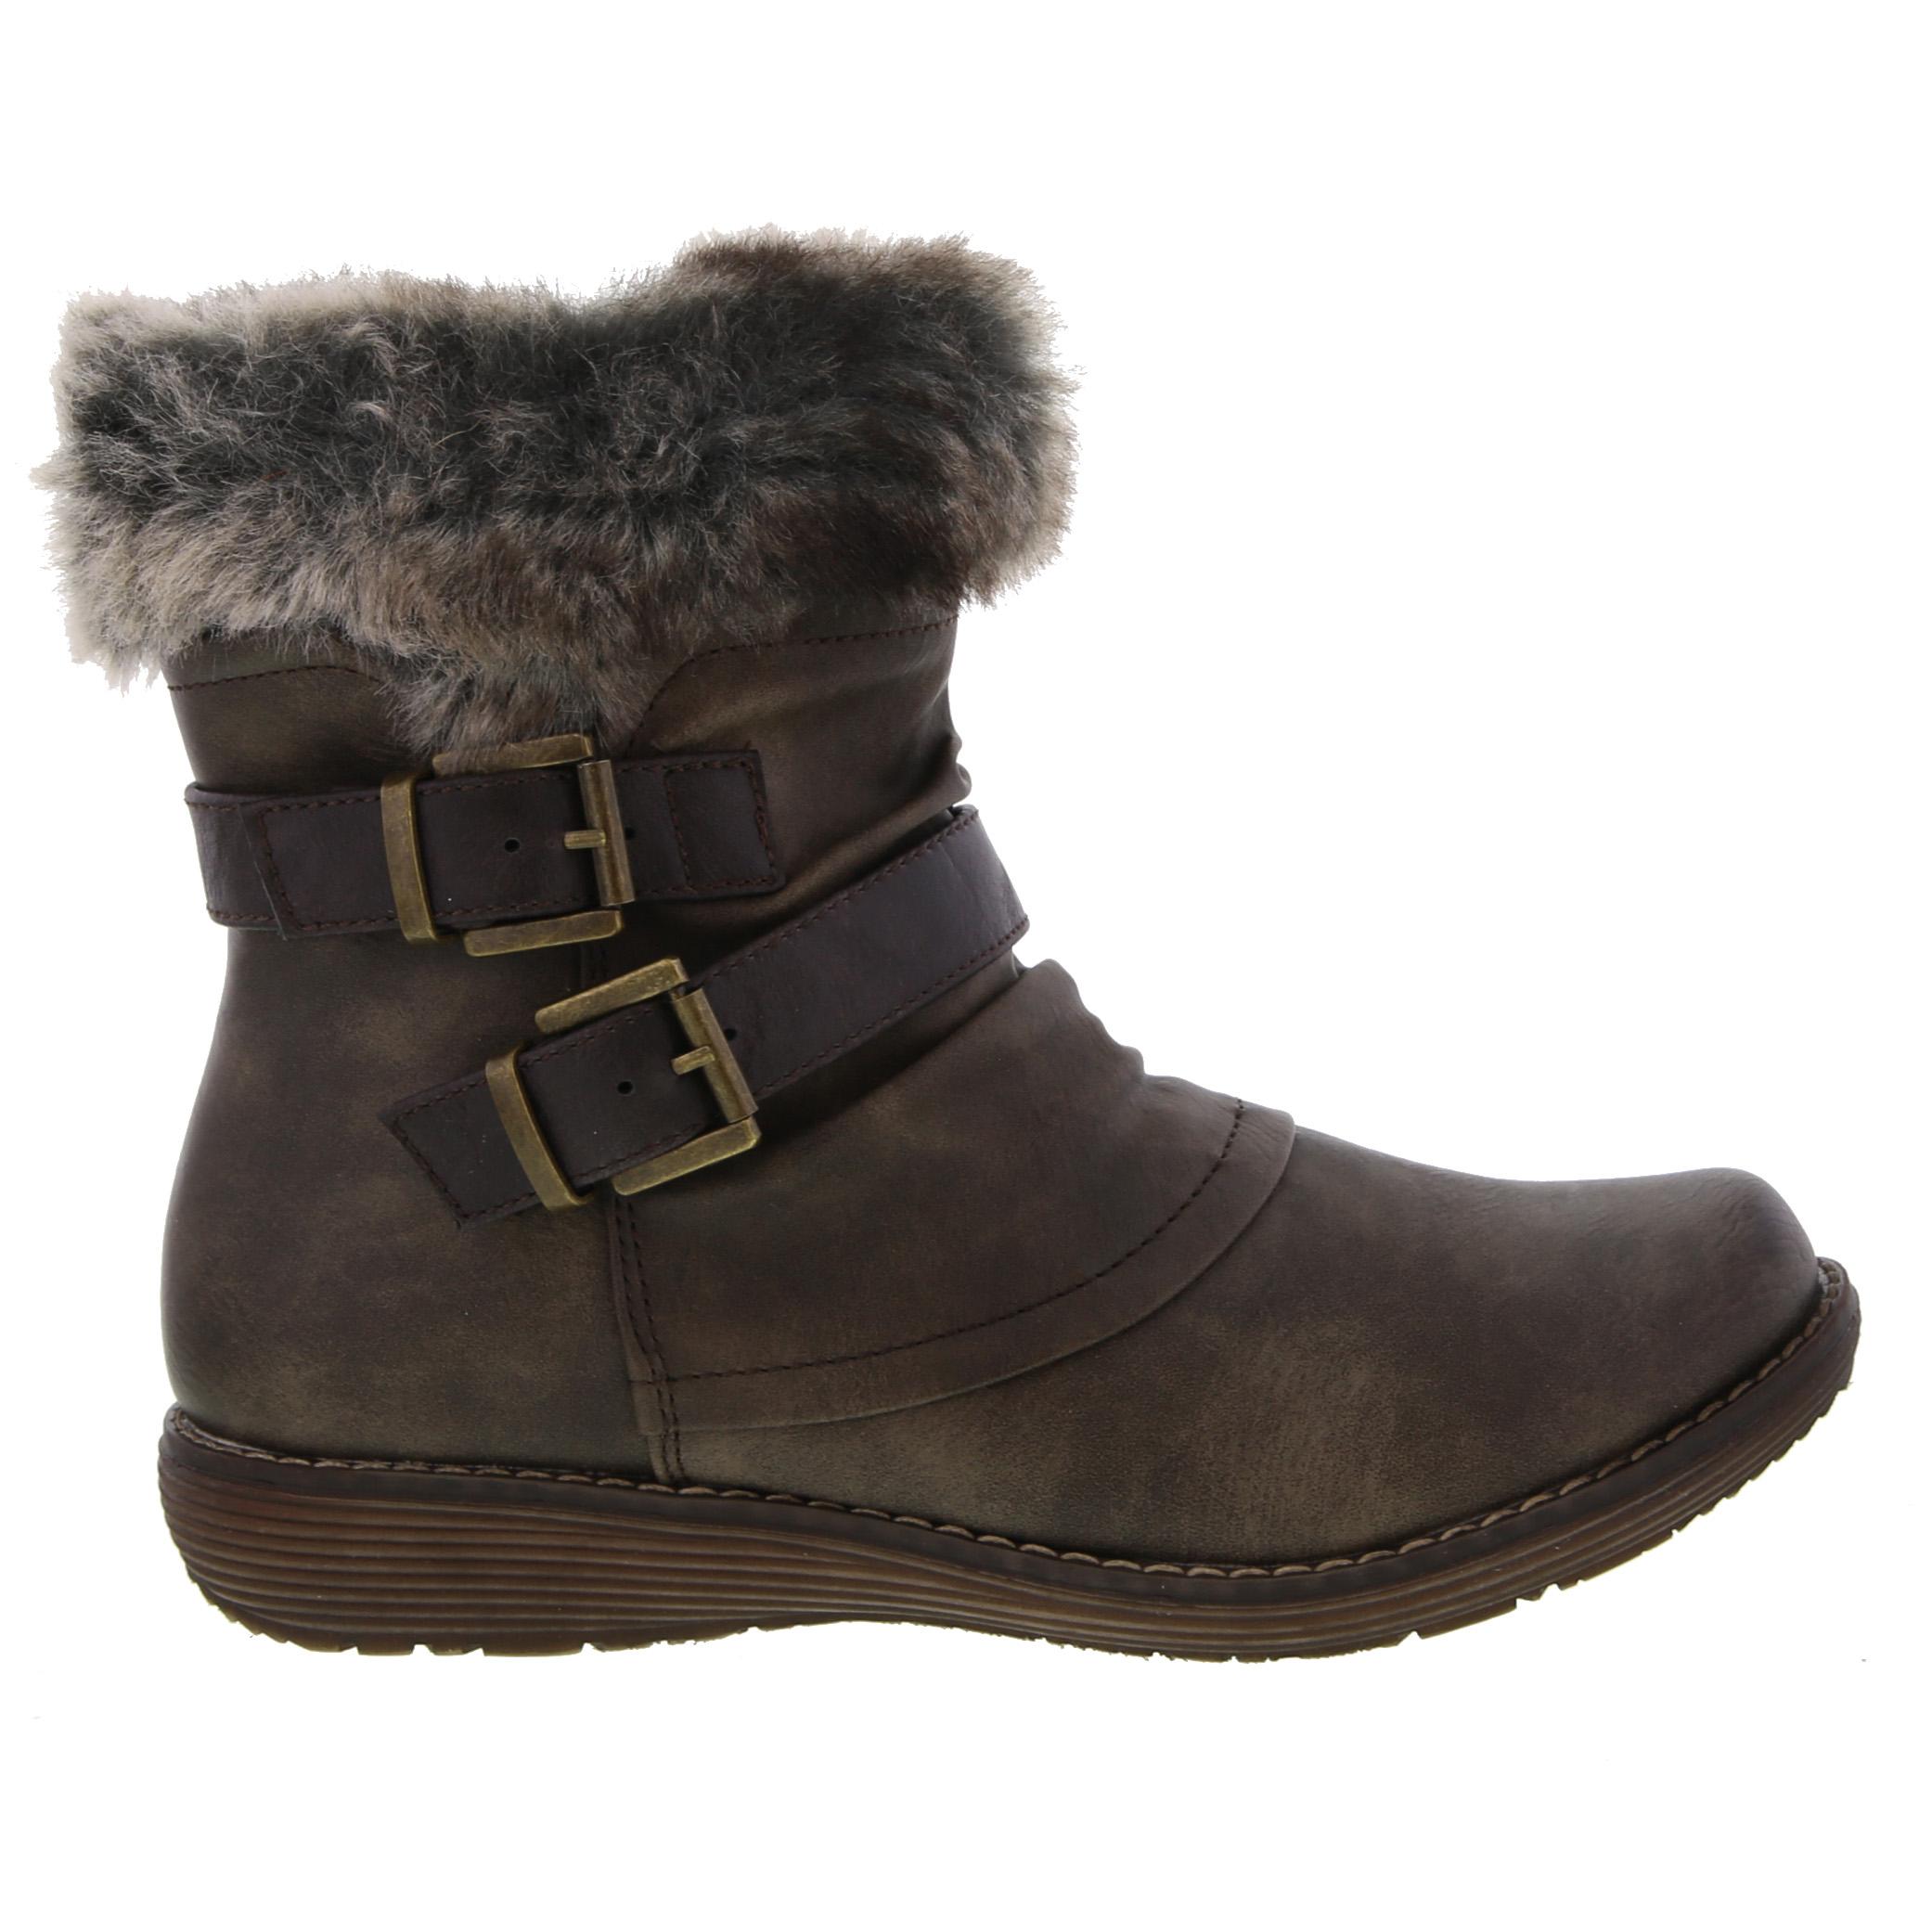 Cipriata Womens Isabella Winter Ankle Boots - UK 6